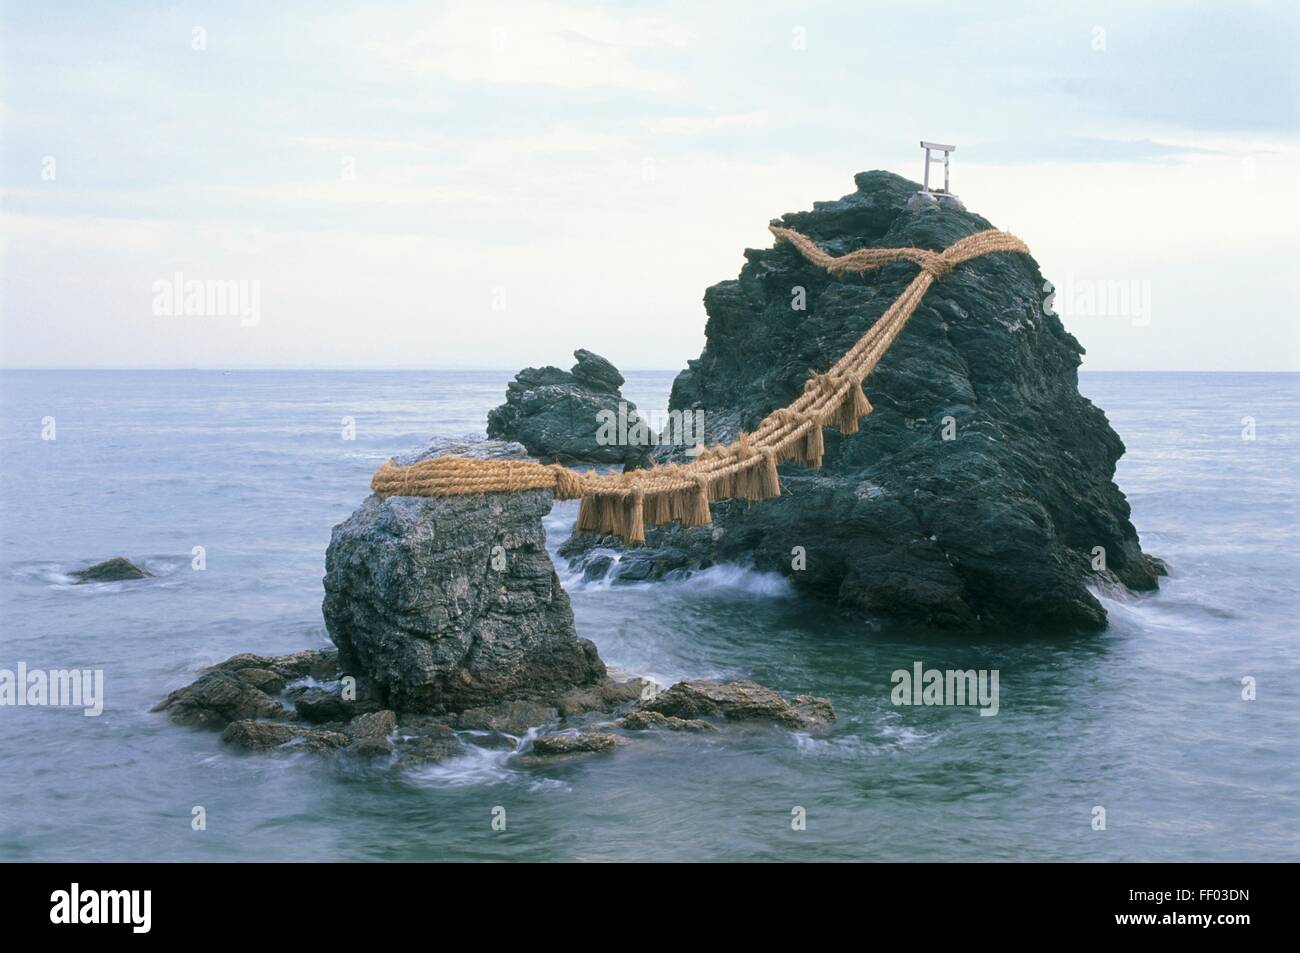 Japan, Honshu, Mie, Futami, the two rocks of Meoto Iwa (wedded rocks) connected by a rope, representing the union of the gods Izanami and Izanagi Stock Photo